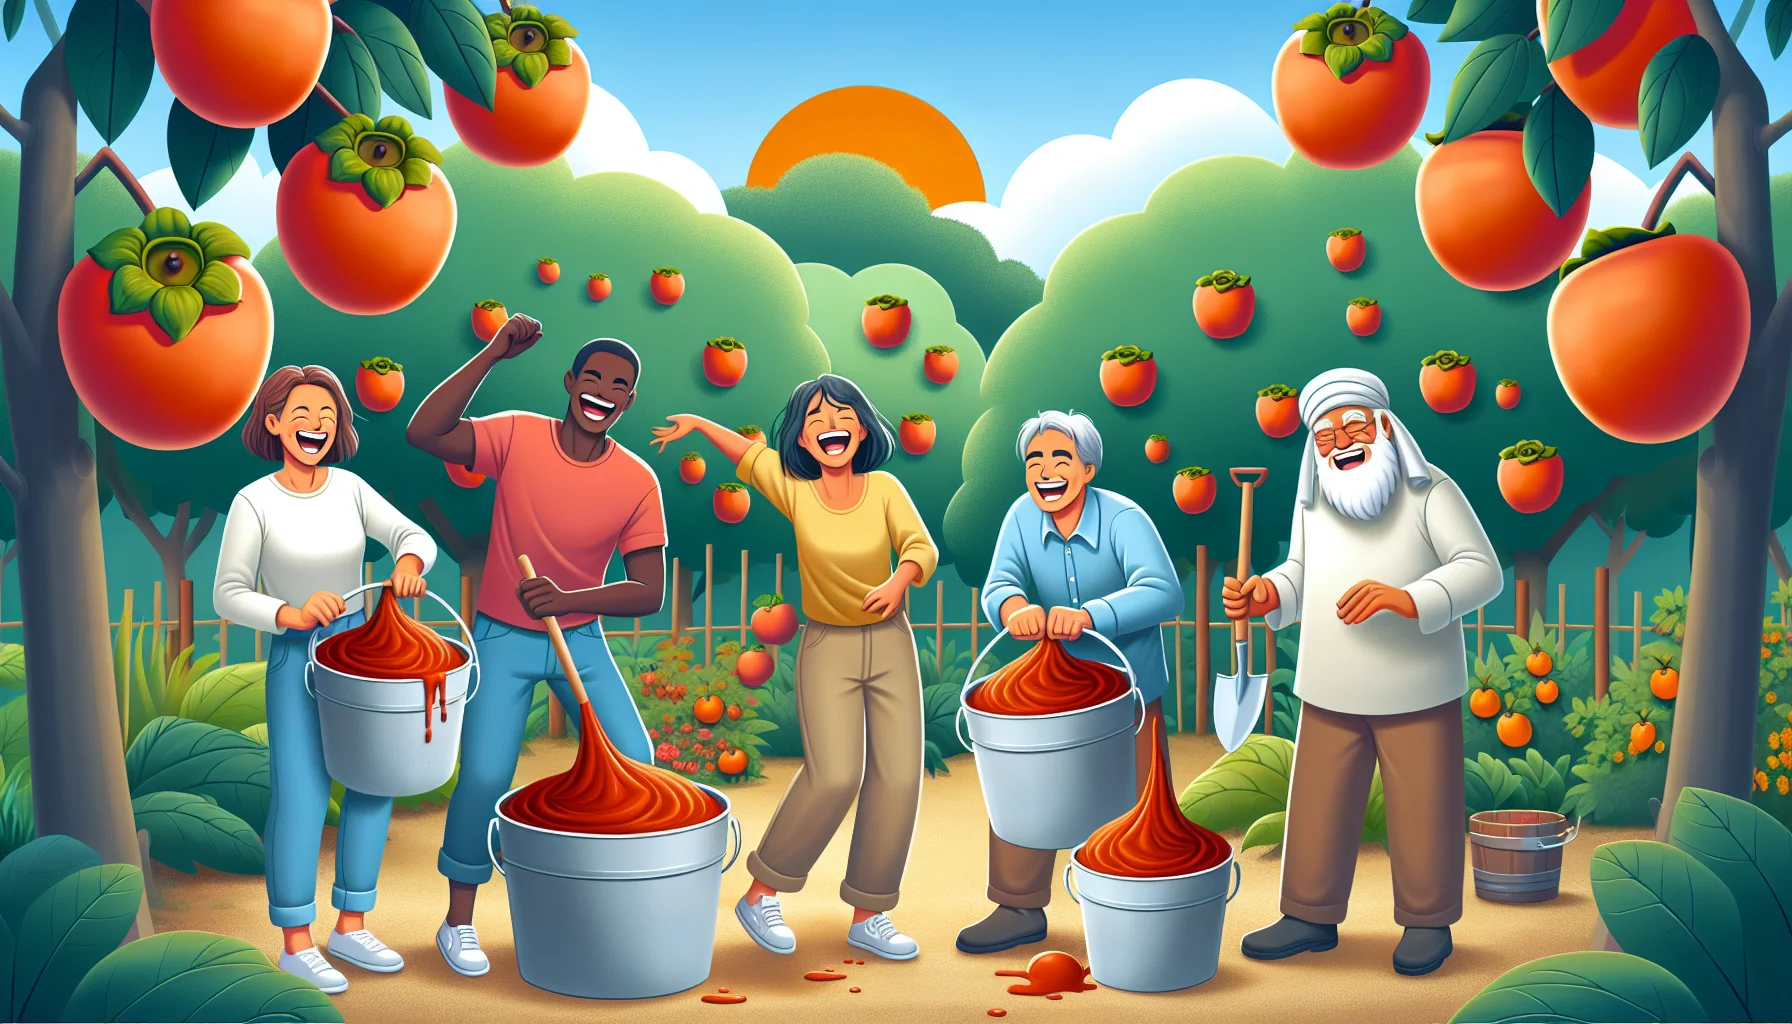 Create a whimsical image featuring a garden setting. In the foreground, lets have a diverse array of people gleefully partaking in gardening activities - a Caucasian woman, a Black man, a Hispanic child, and a Middle-Eastern elderly man. In the background, let's see lush vegetation bearing ample persimmons. In the middle, let's introduce an unusual sight: buckets filled with richly-coloured persimmon puree. The people seem to be using the puree as fertilizer, laughing with joy, suggesting the puree's magical properties for plant growth - a fun touch that only adds to the charm and allure of gardening.